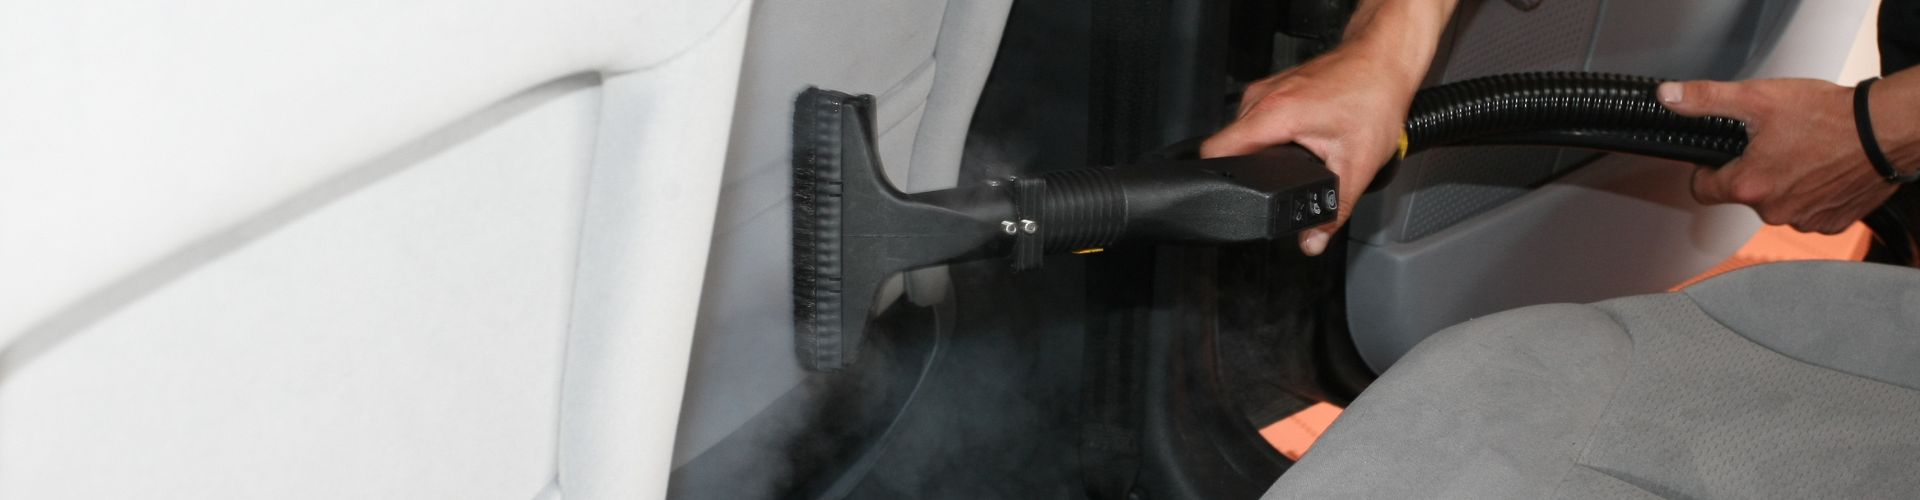 Cleaning a car seat with a steam cleaner